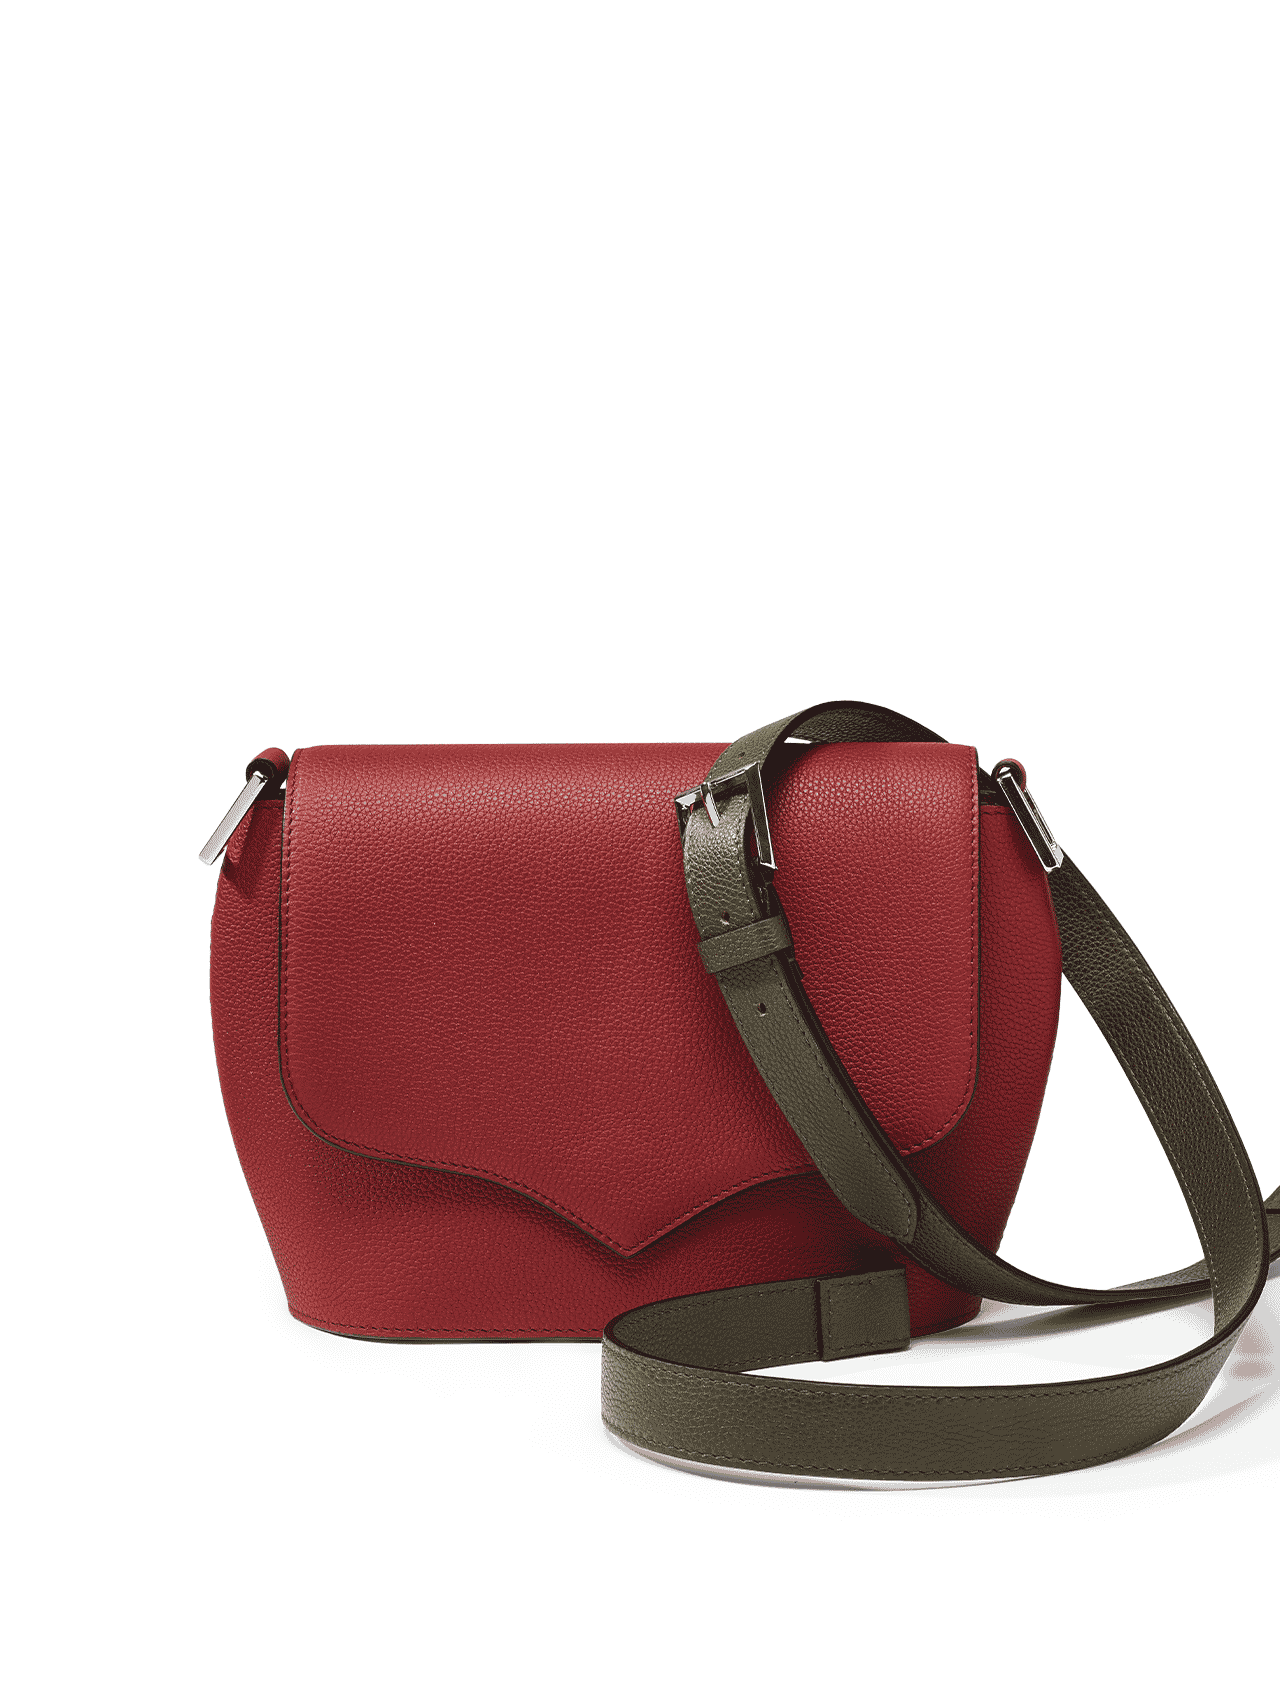 bag leather jean rousseau red brown